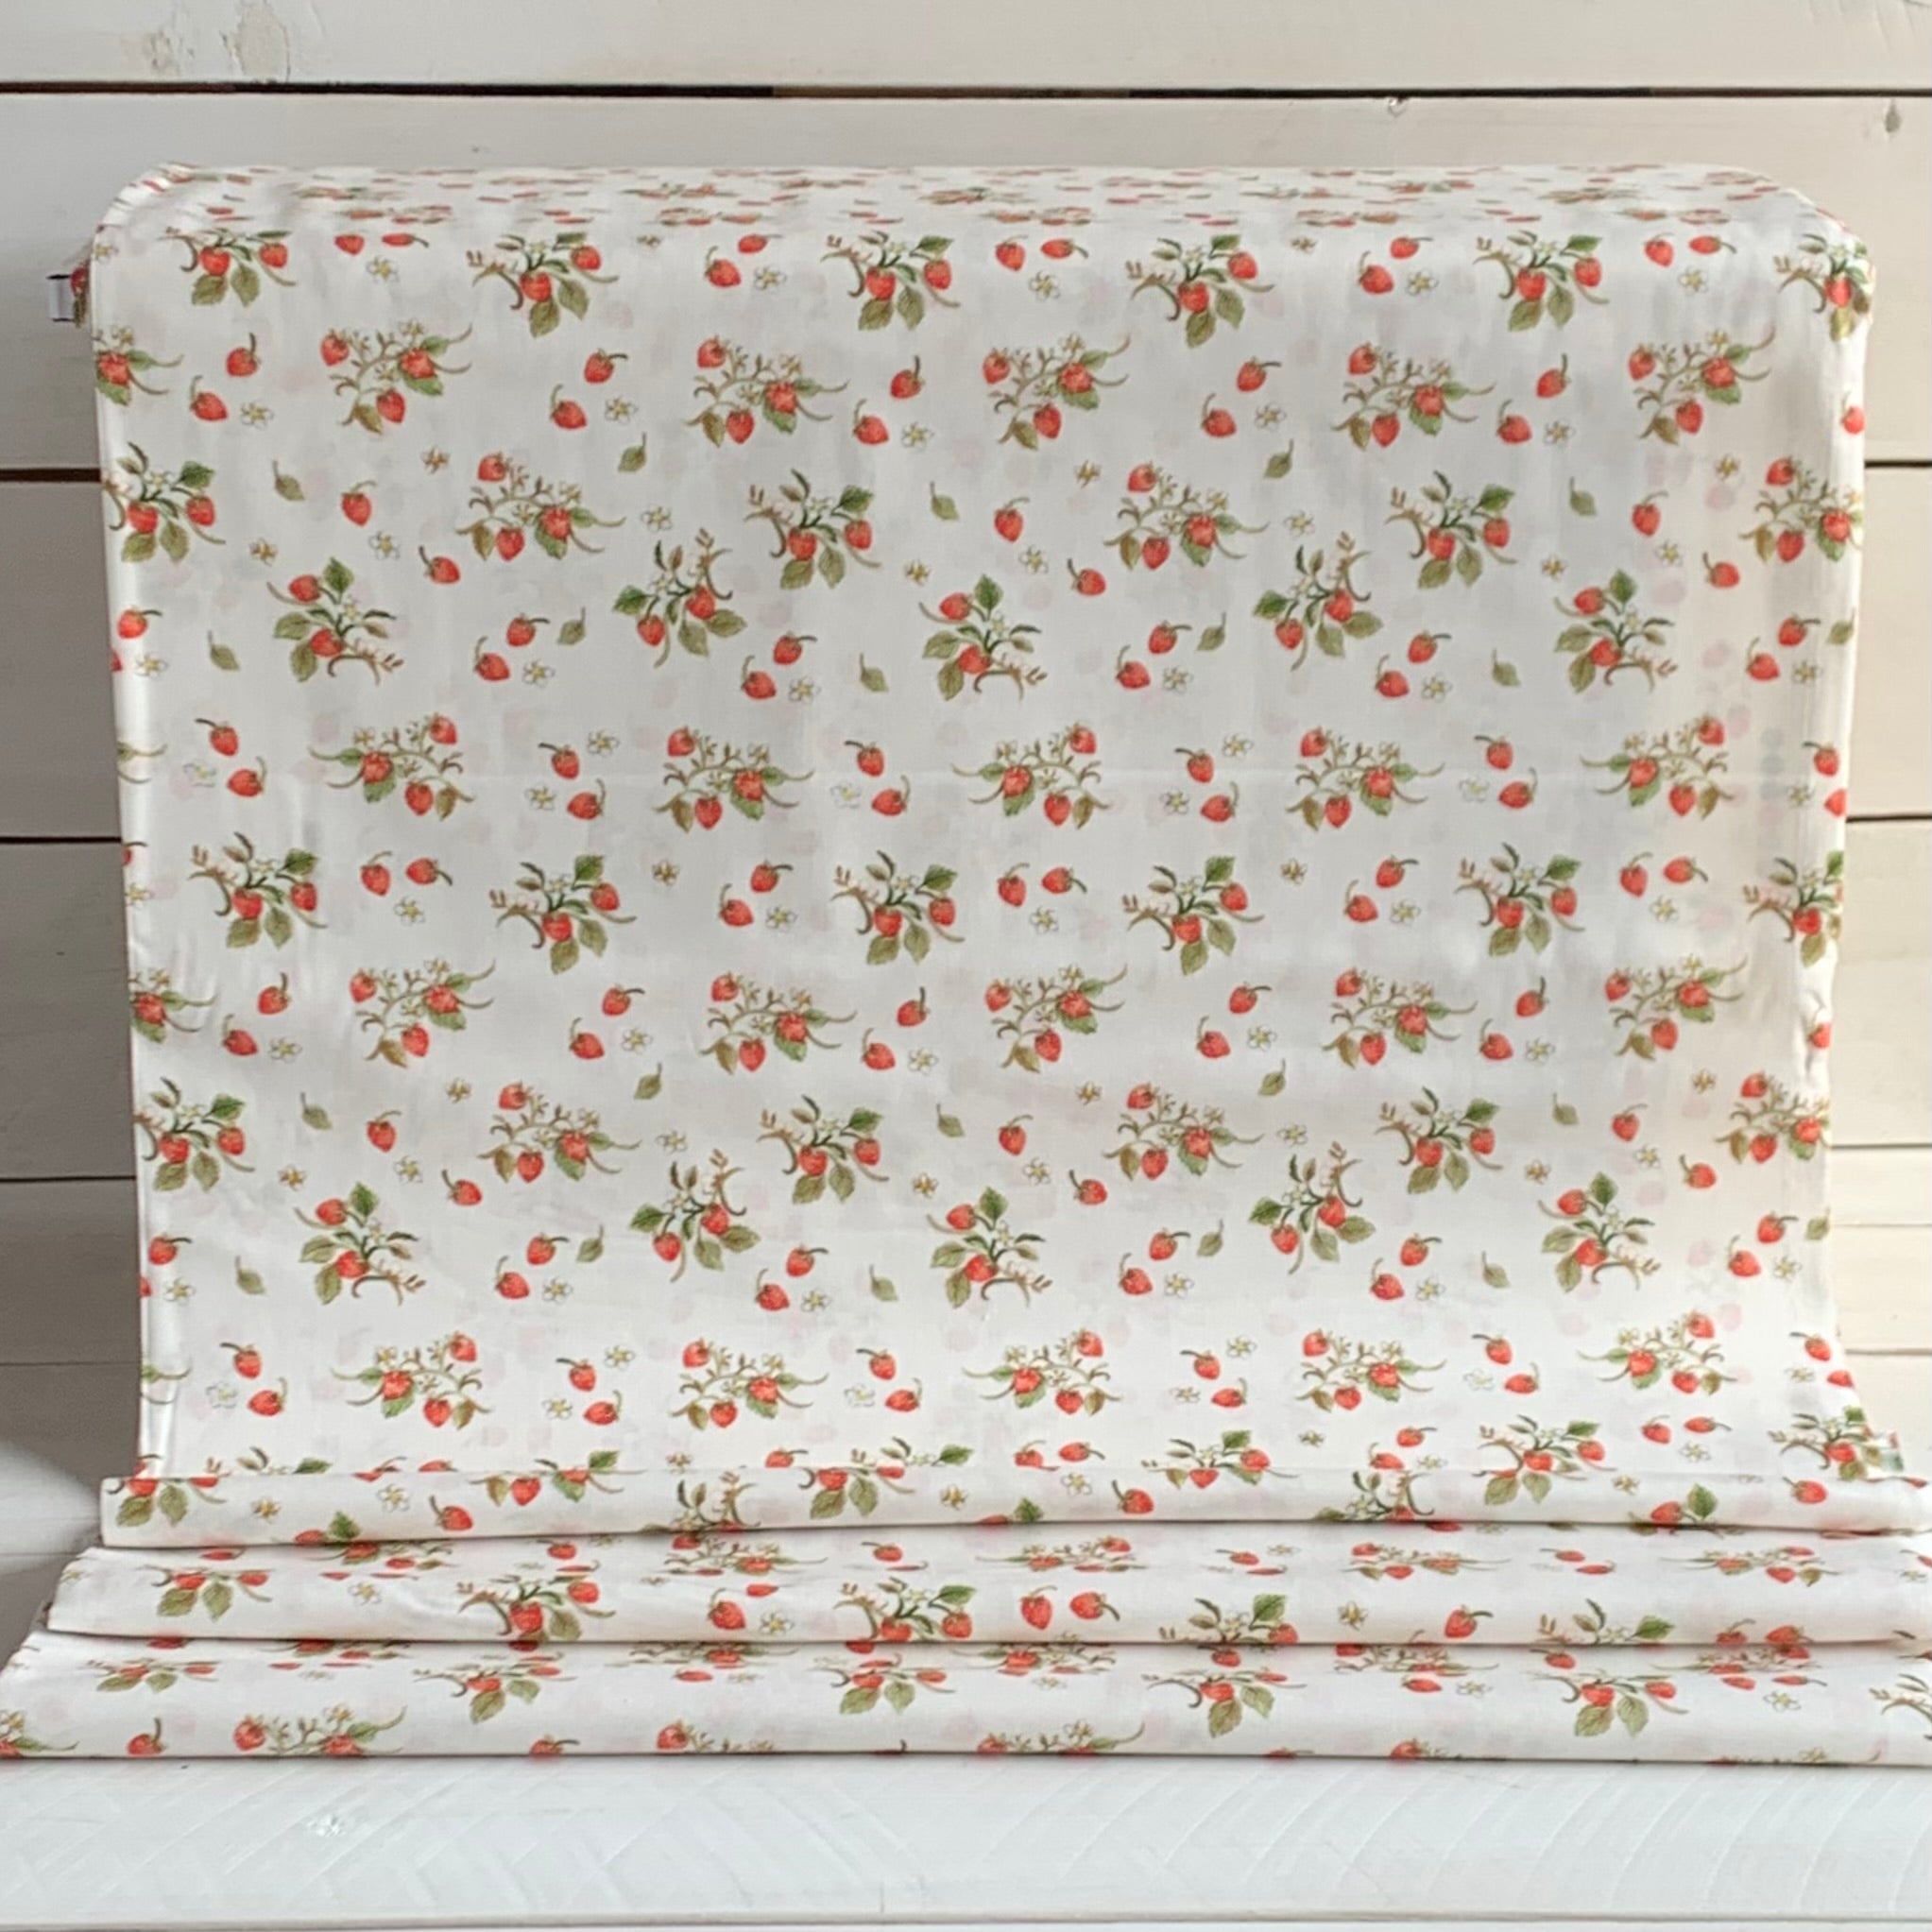 Strawberries Farm Meadow by Clare Therese Gray Windham Fabrics - Ivory 52796-1 Cotton Fabric